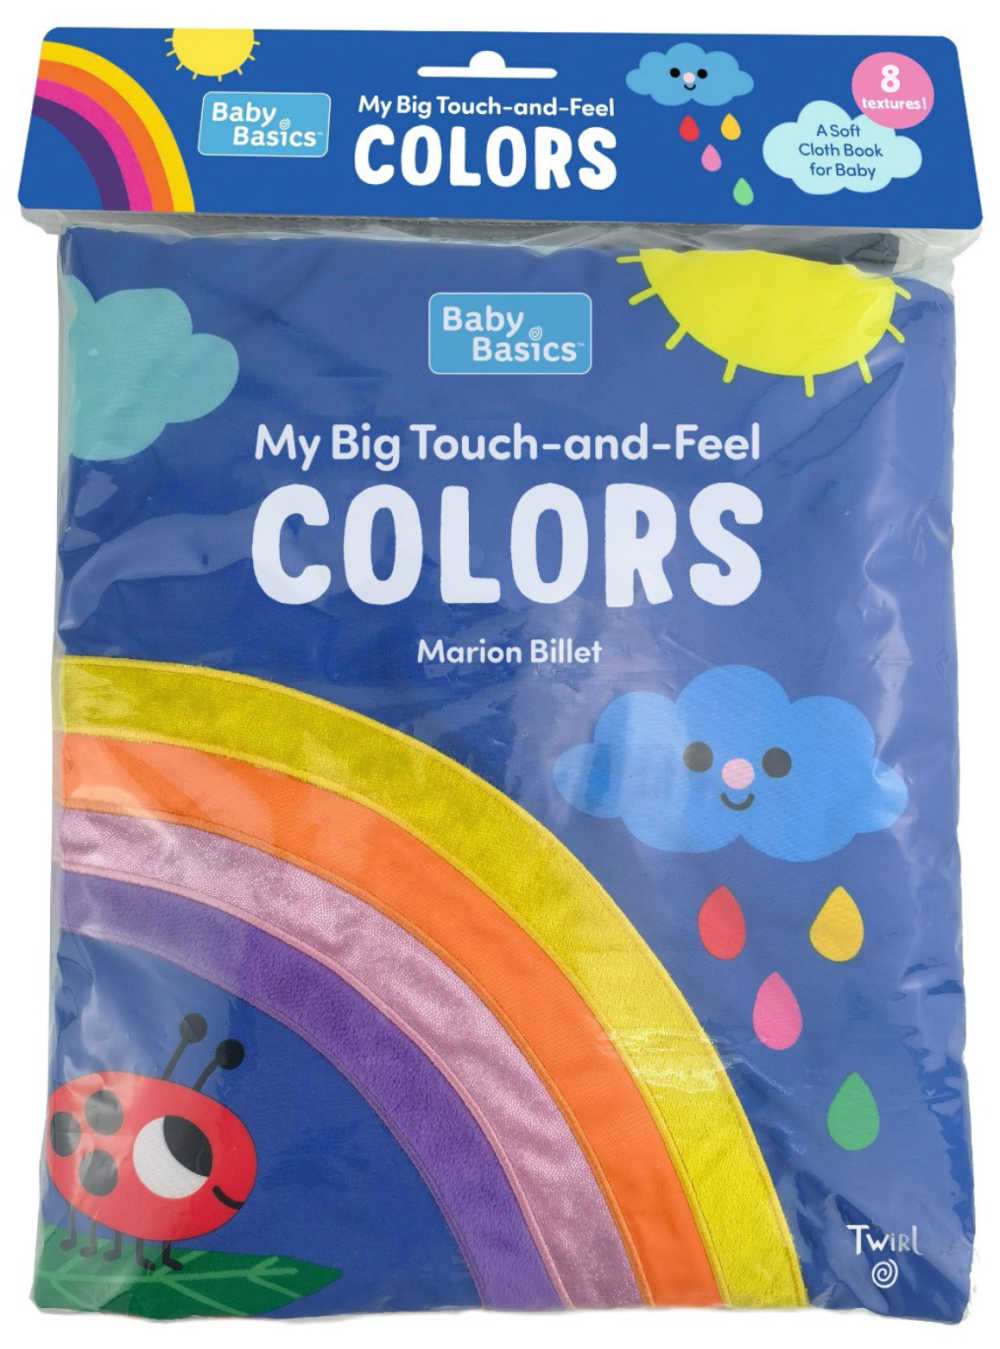 My touch and feel colors